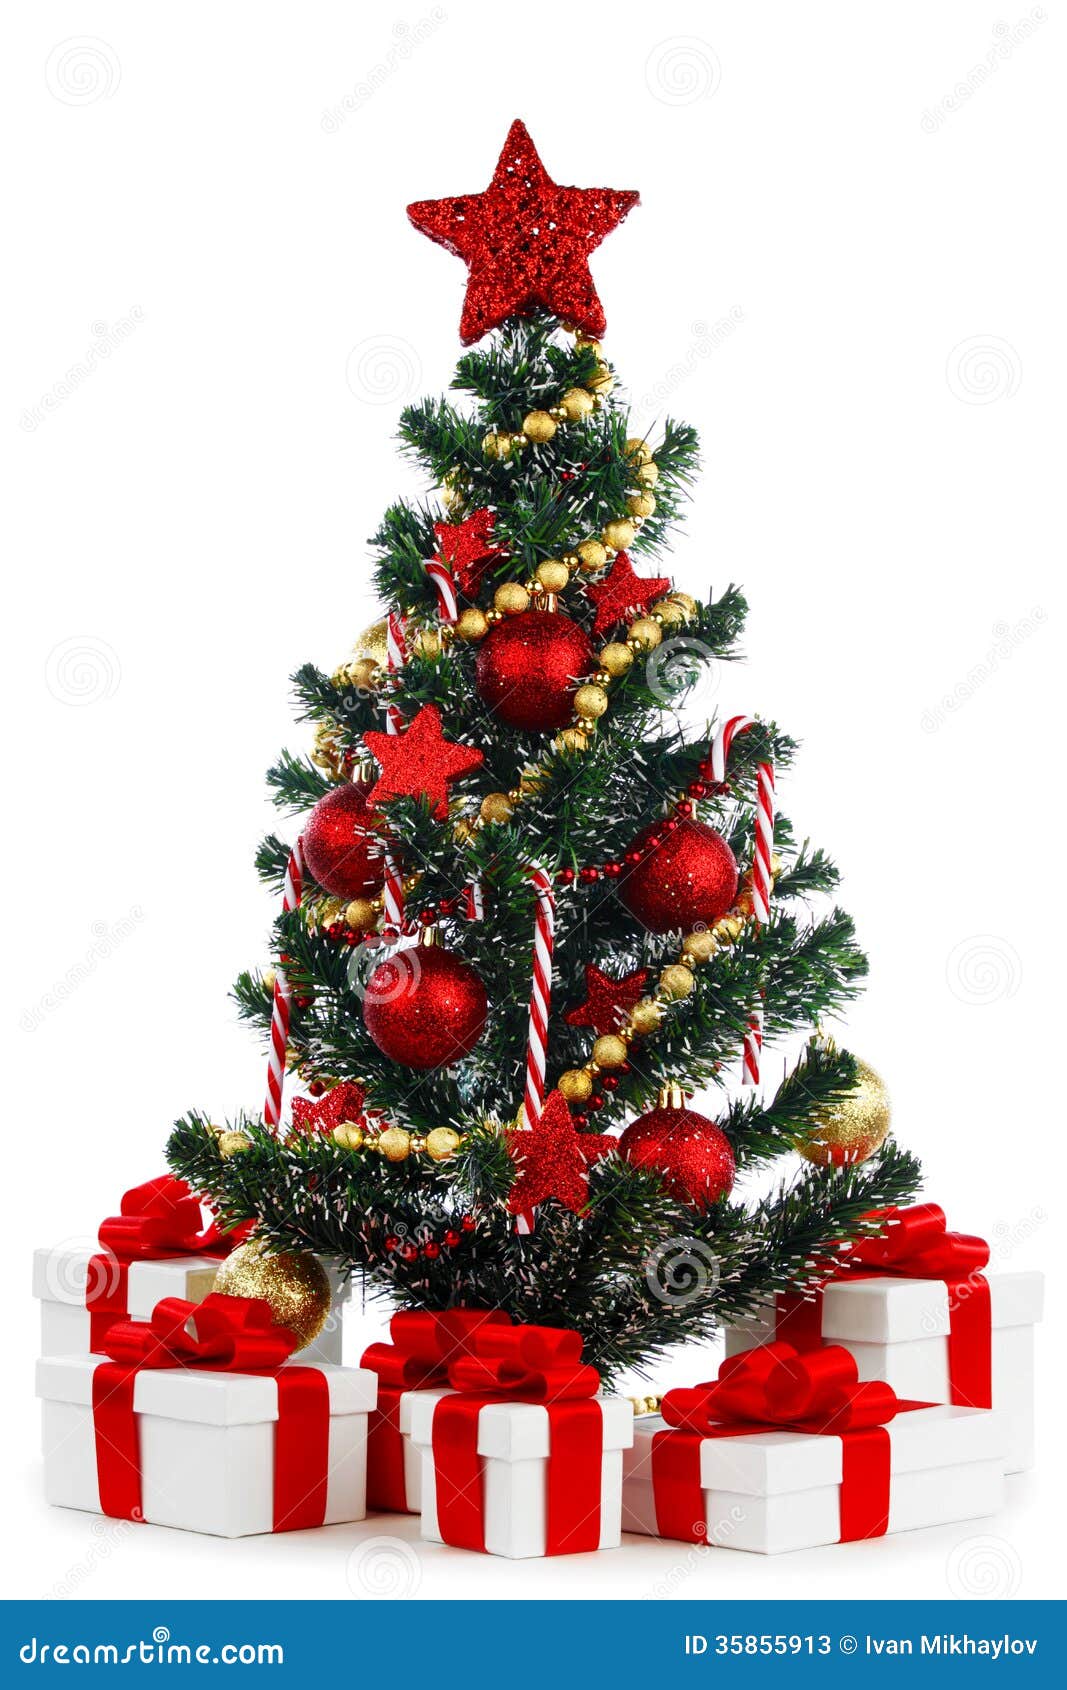 Decorated Christmas tree on white background. Decorated Christmas tree isolated on white background